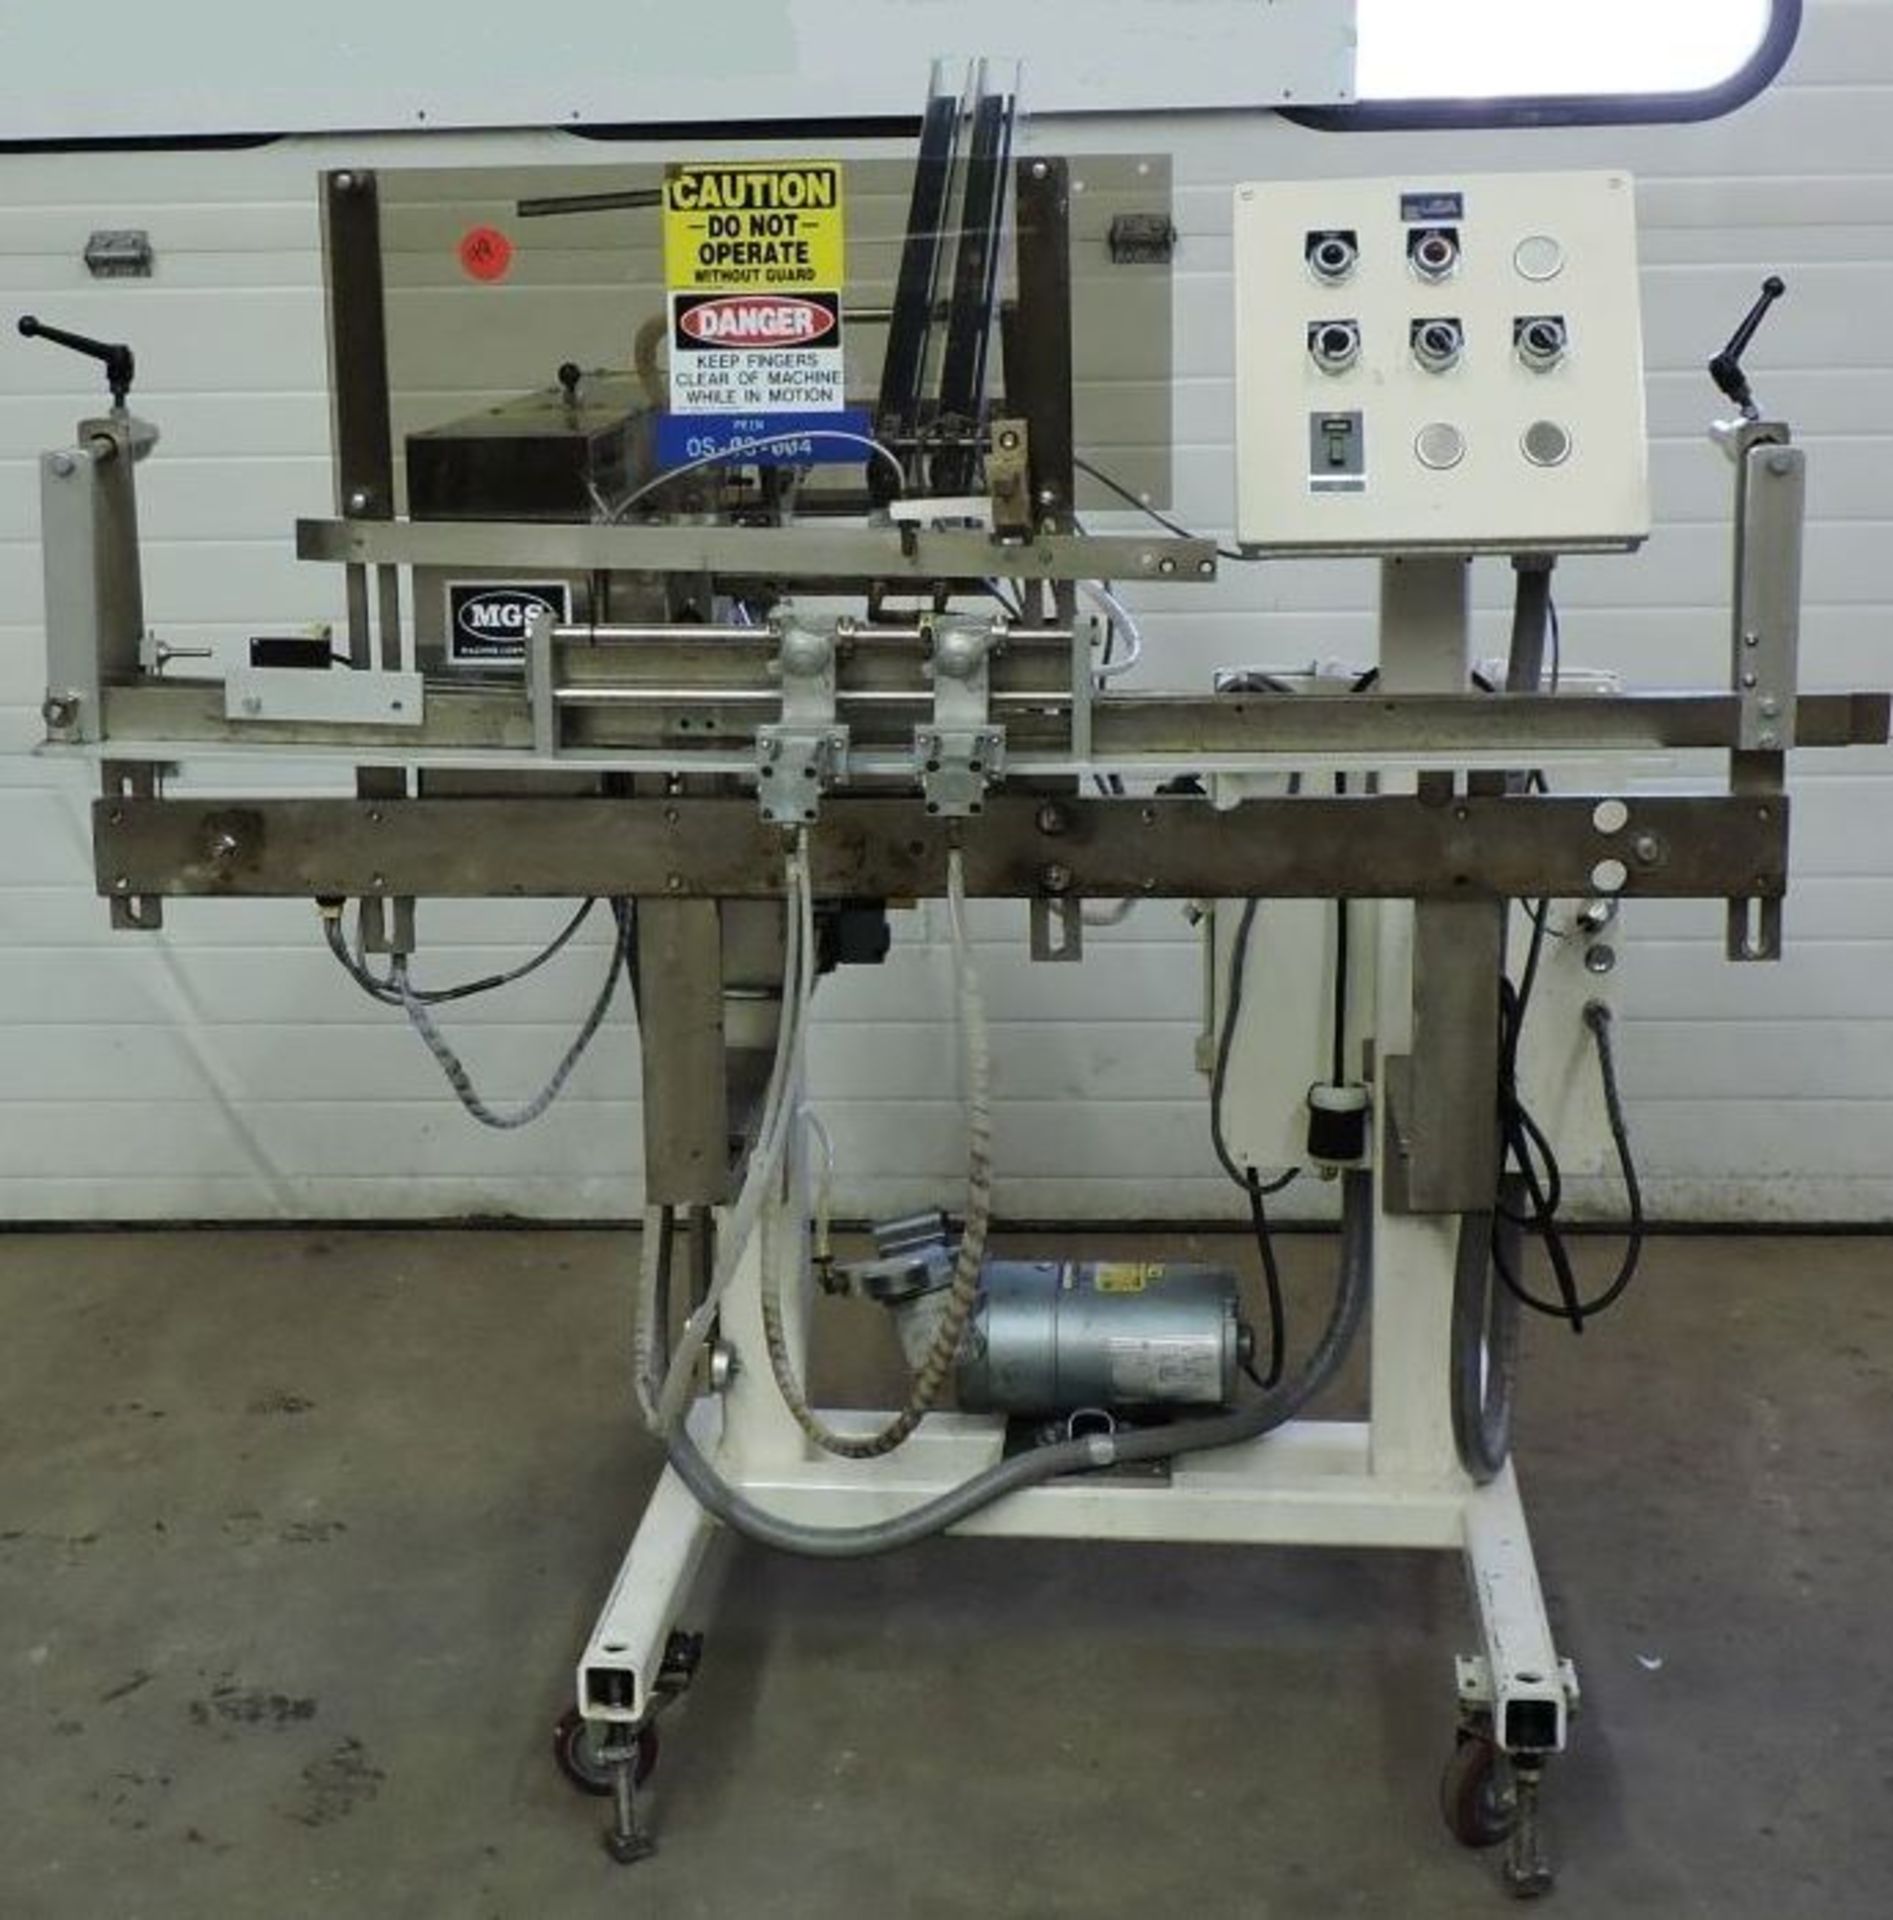 MGS Leaflet Inserter - Model 105-230, Serial 4057, 115 Volts, 1 Phase, 60 Hz, 15 Amp, Machine is